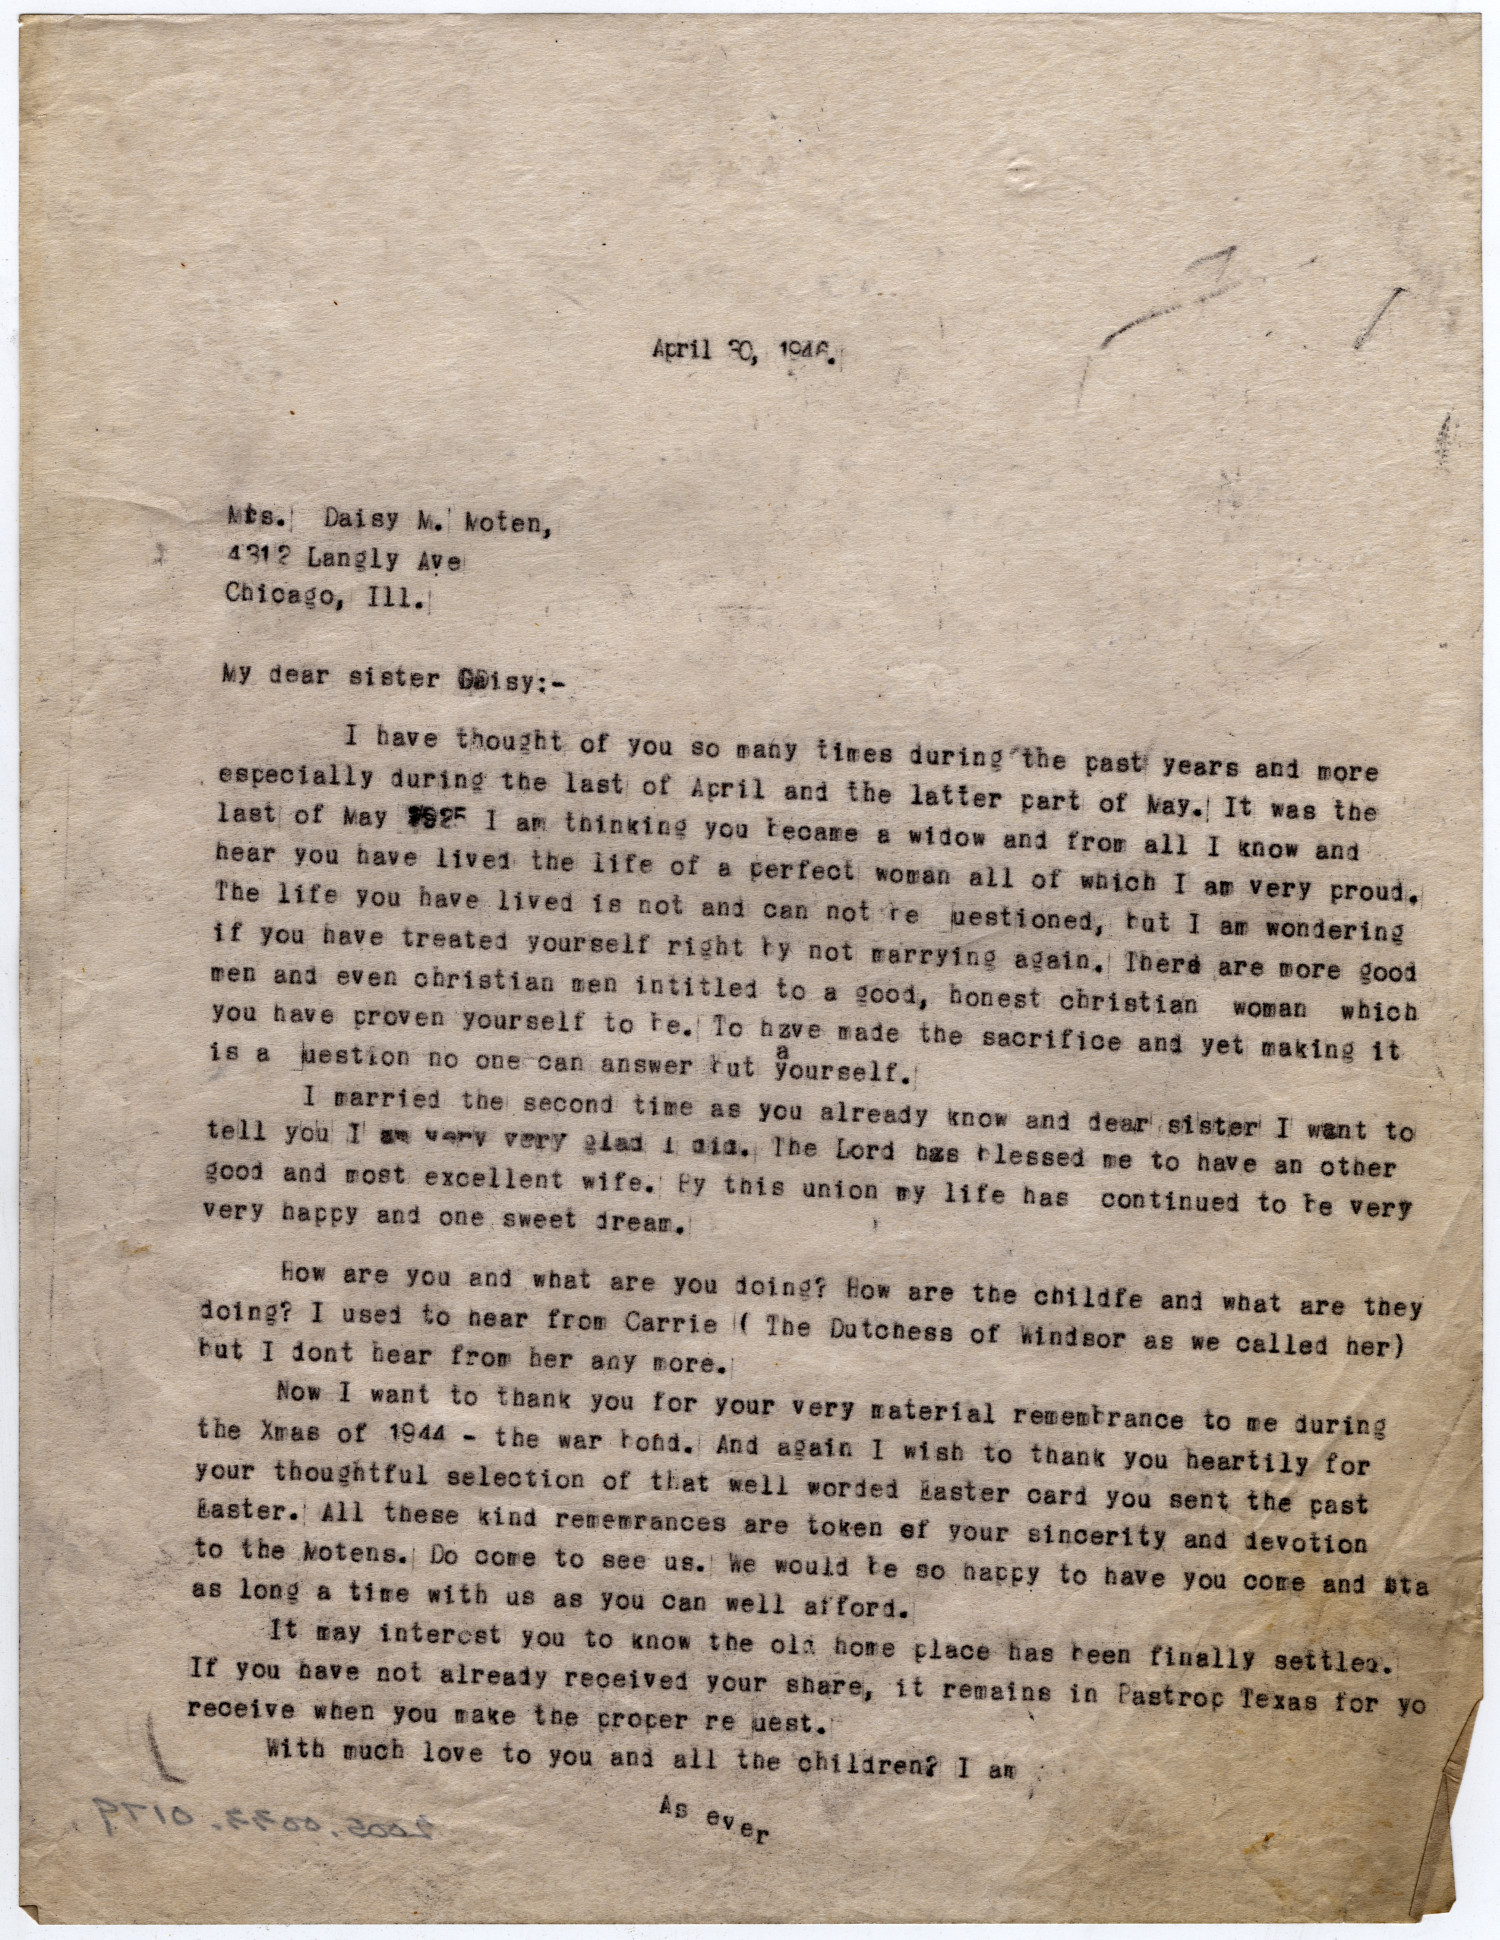 [Letter from Dr. Edwin D. Moten to Daisy M. Moten, April 30, 1946]
                                                
                                                    [Sequence #]: 1 of 1
                                                